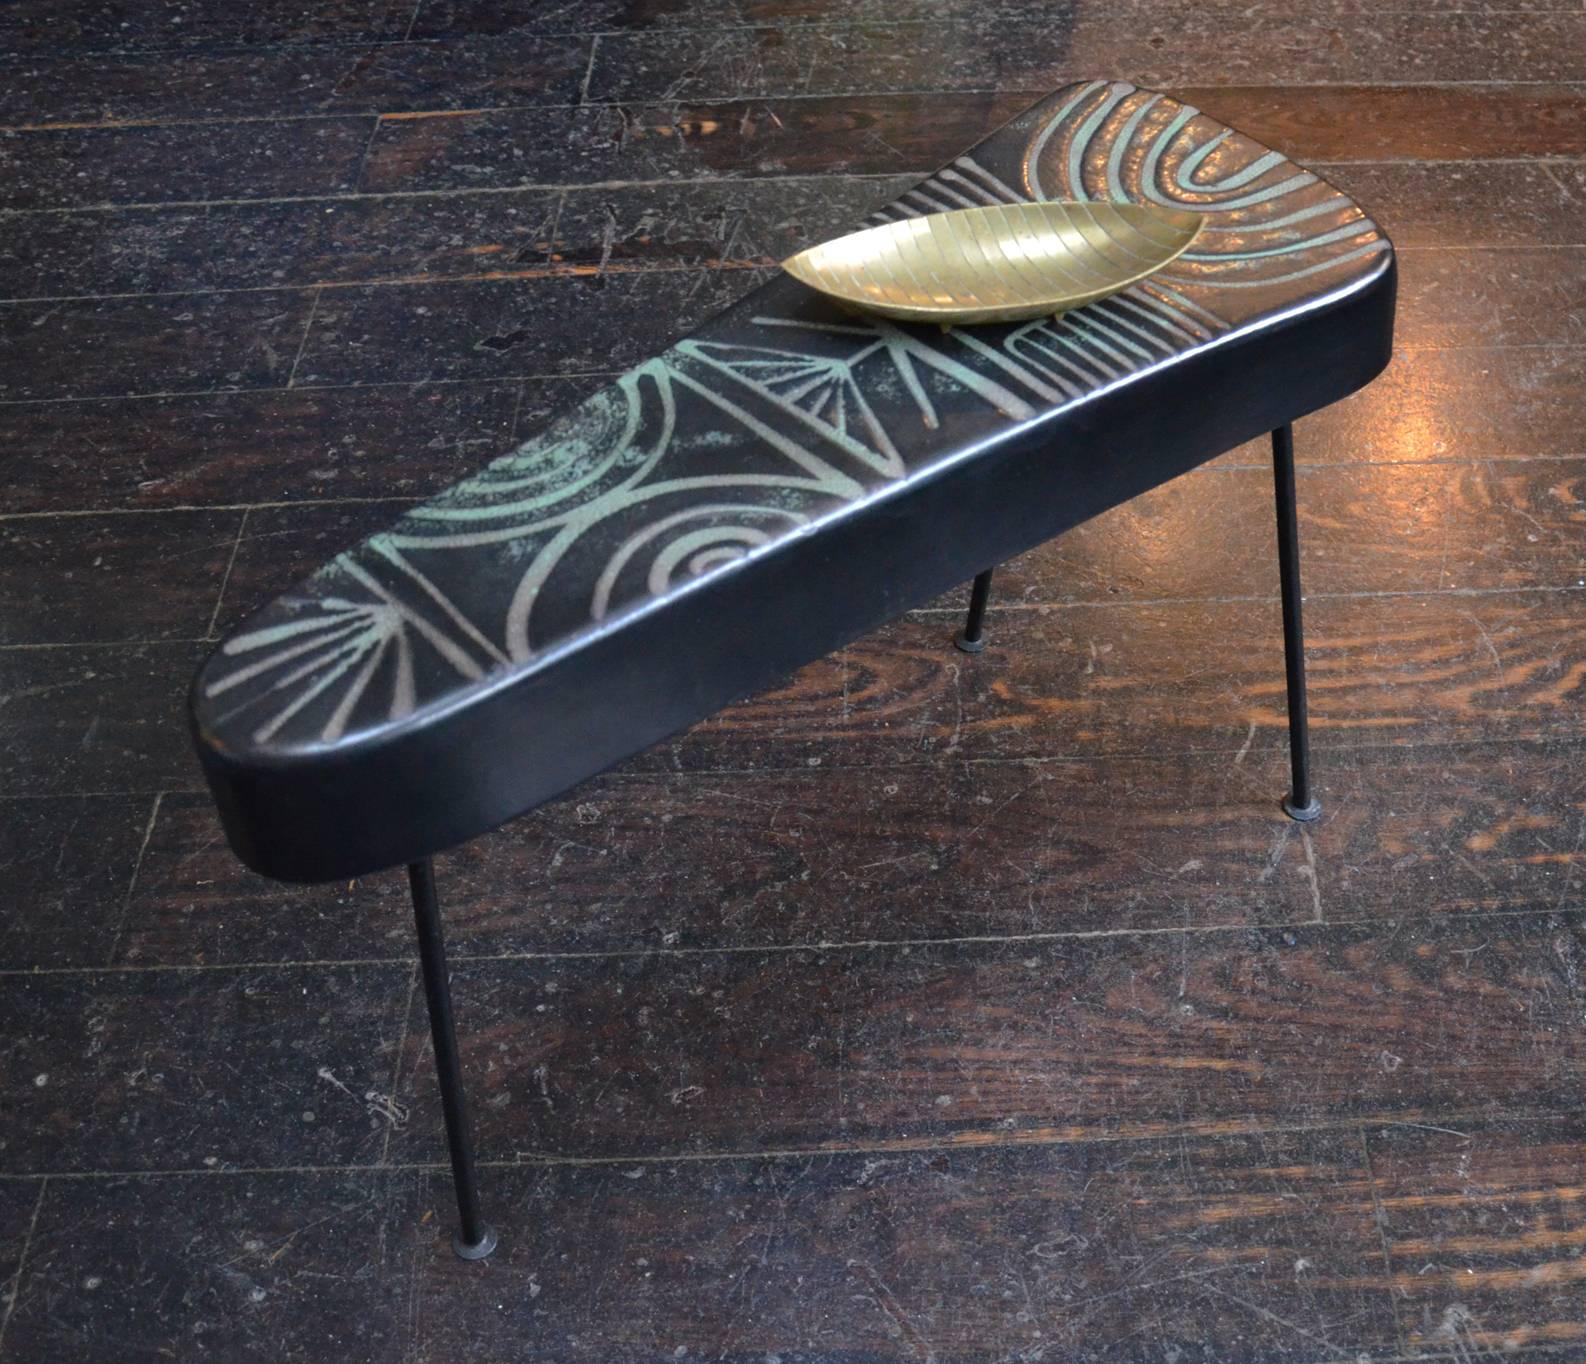 Exquisite ceramic side table by Roger Capron (1920-2006).
This side table could be between two armchairs or on the side or in front of a sofa. 
It is a sculptural art piece.
The pattern on the ceramic top is quite rare in the work of Roger Capron